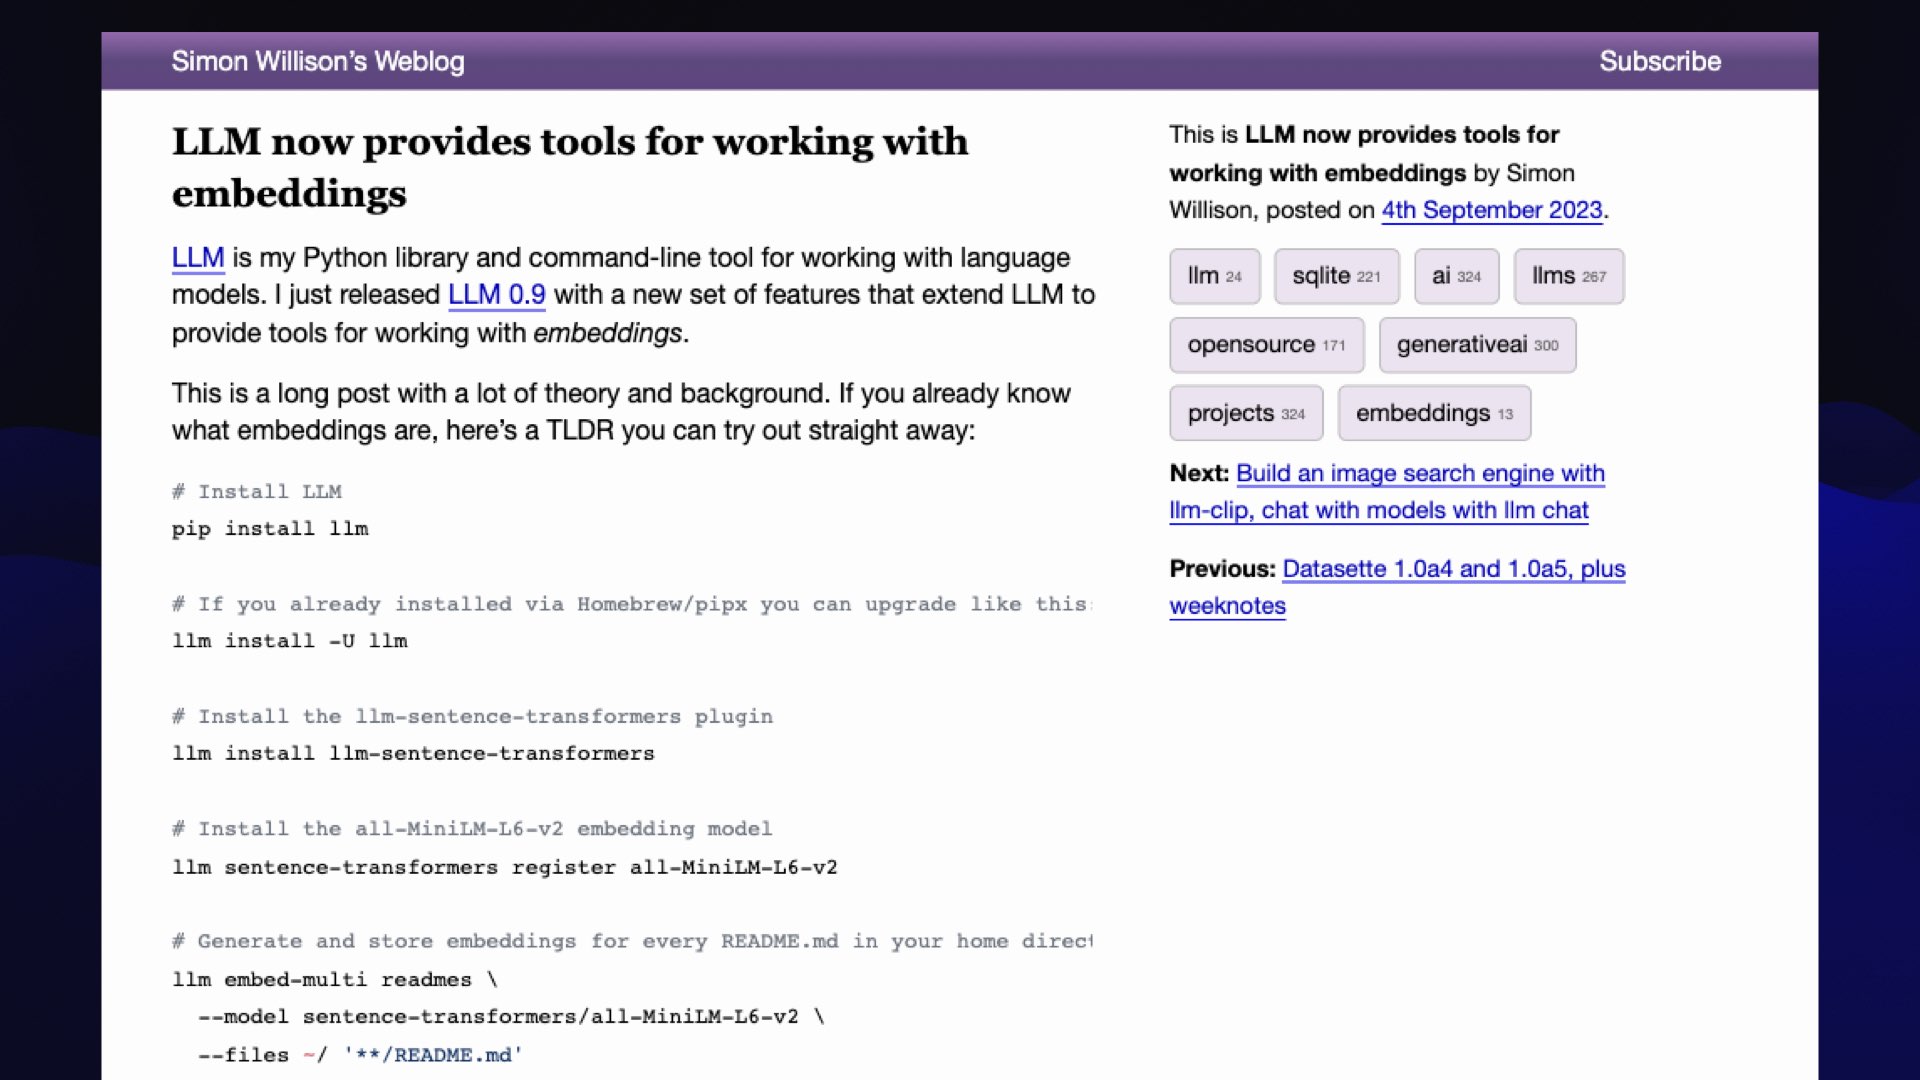 Simon Willison’s Weblog: LLM now provides tools for working with embeddings  4th September 2023